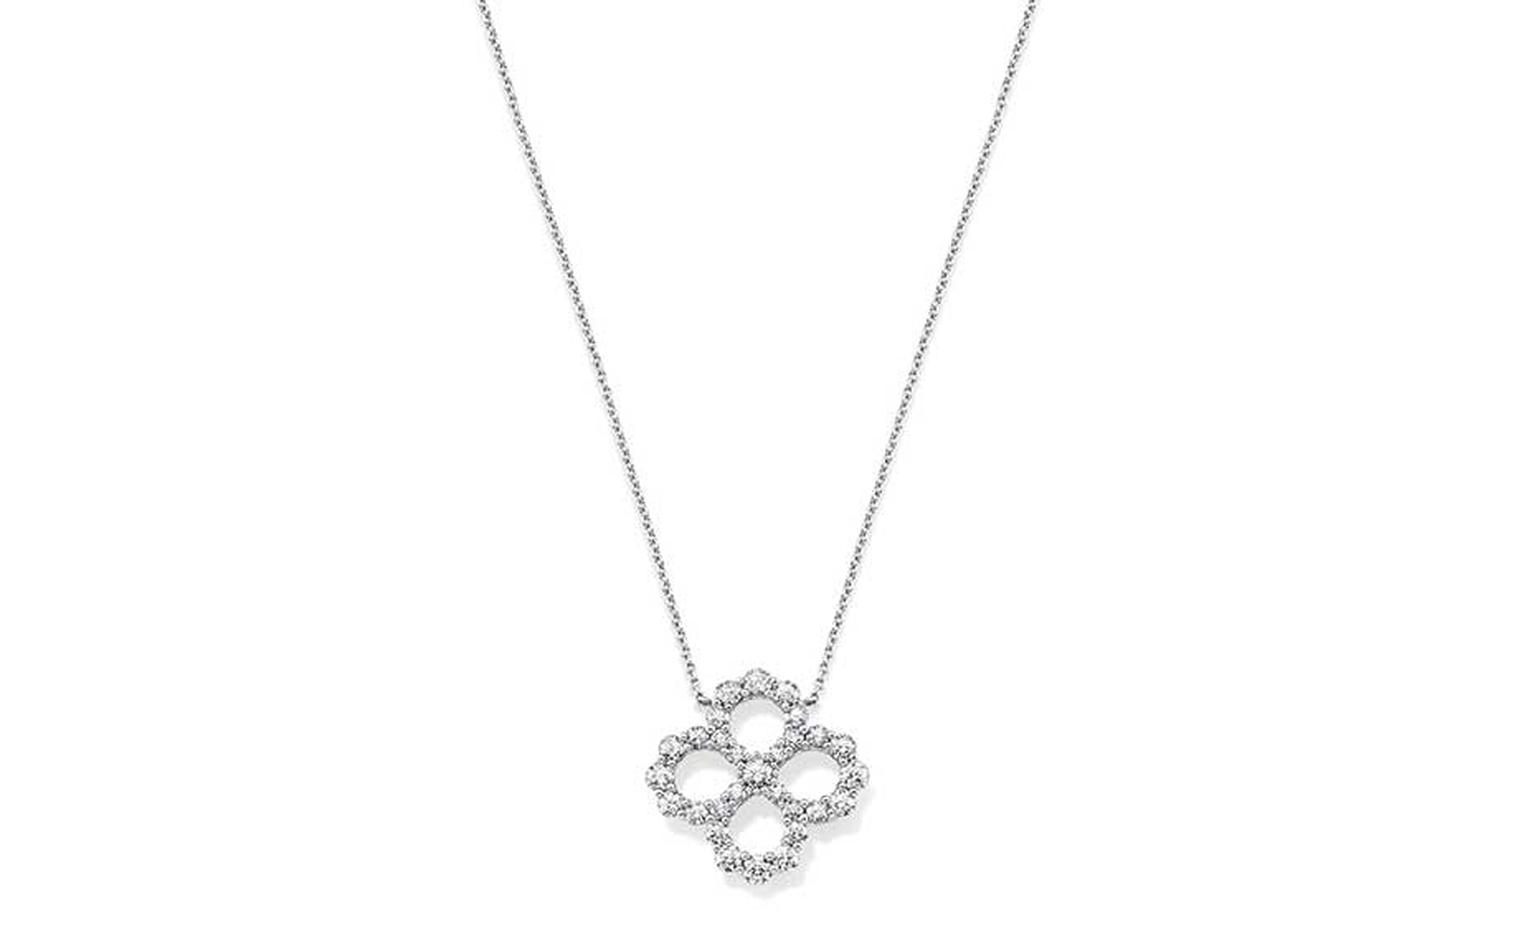 Harry Winston Diamond Loop collection necklace in platinum